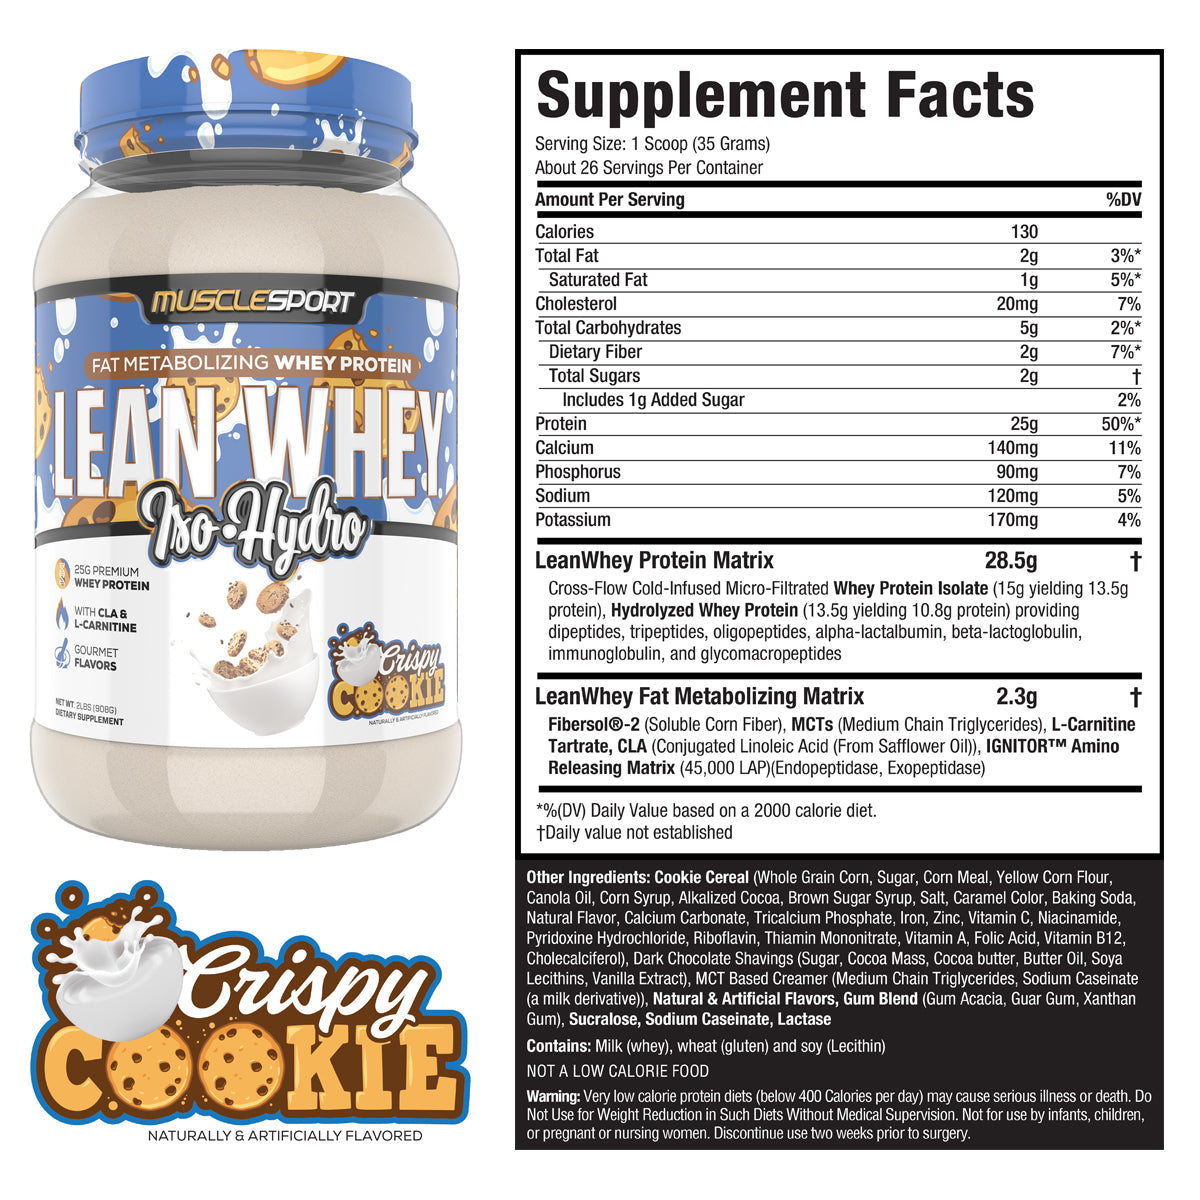 Crispy Cookie Lean Whey Supplement Facts